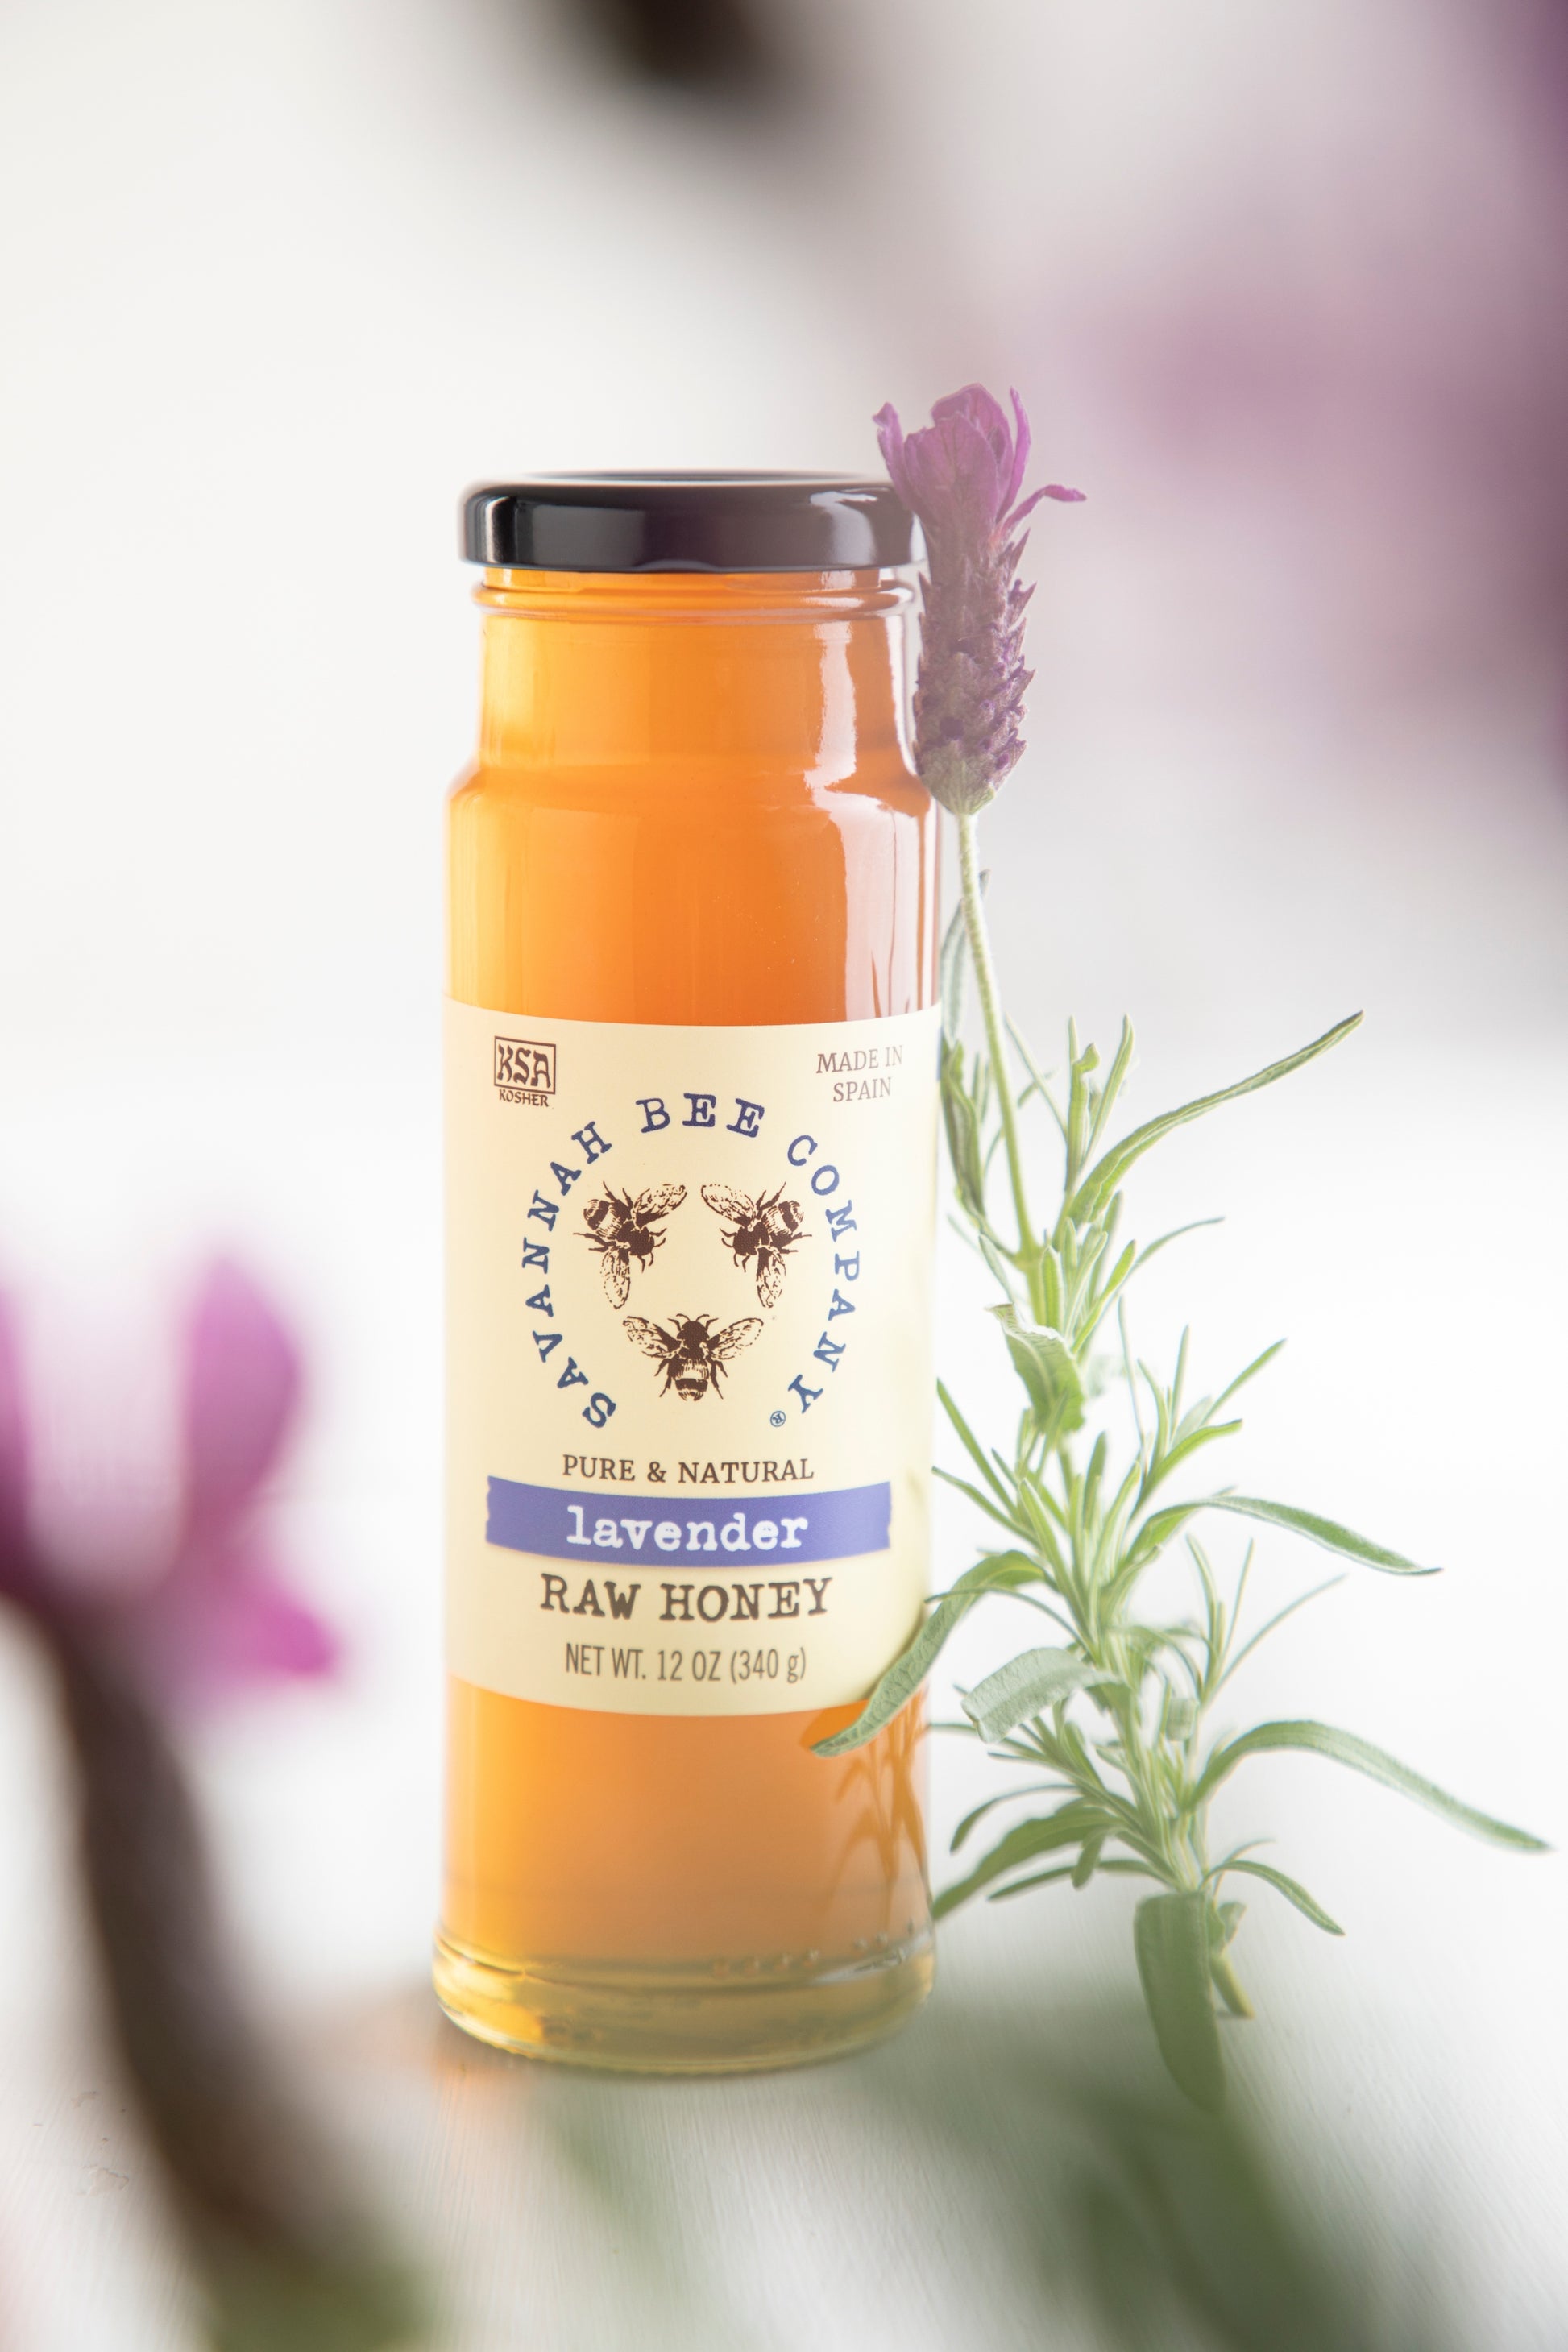 Pure & Natural Lavender Raw Honey 12 oz. surrounded by lavender sprigs.